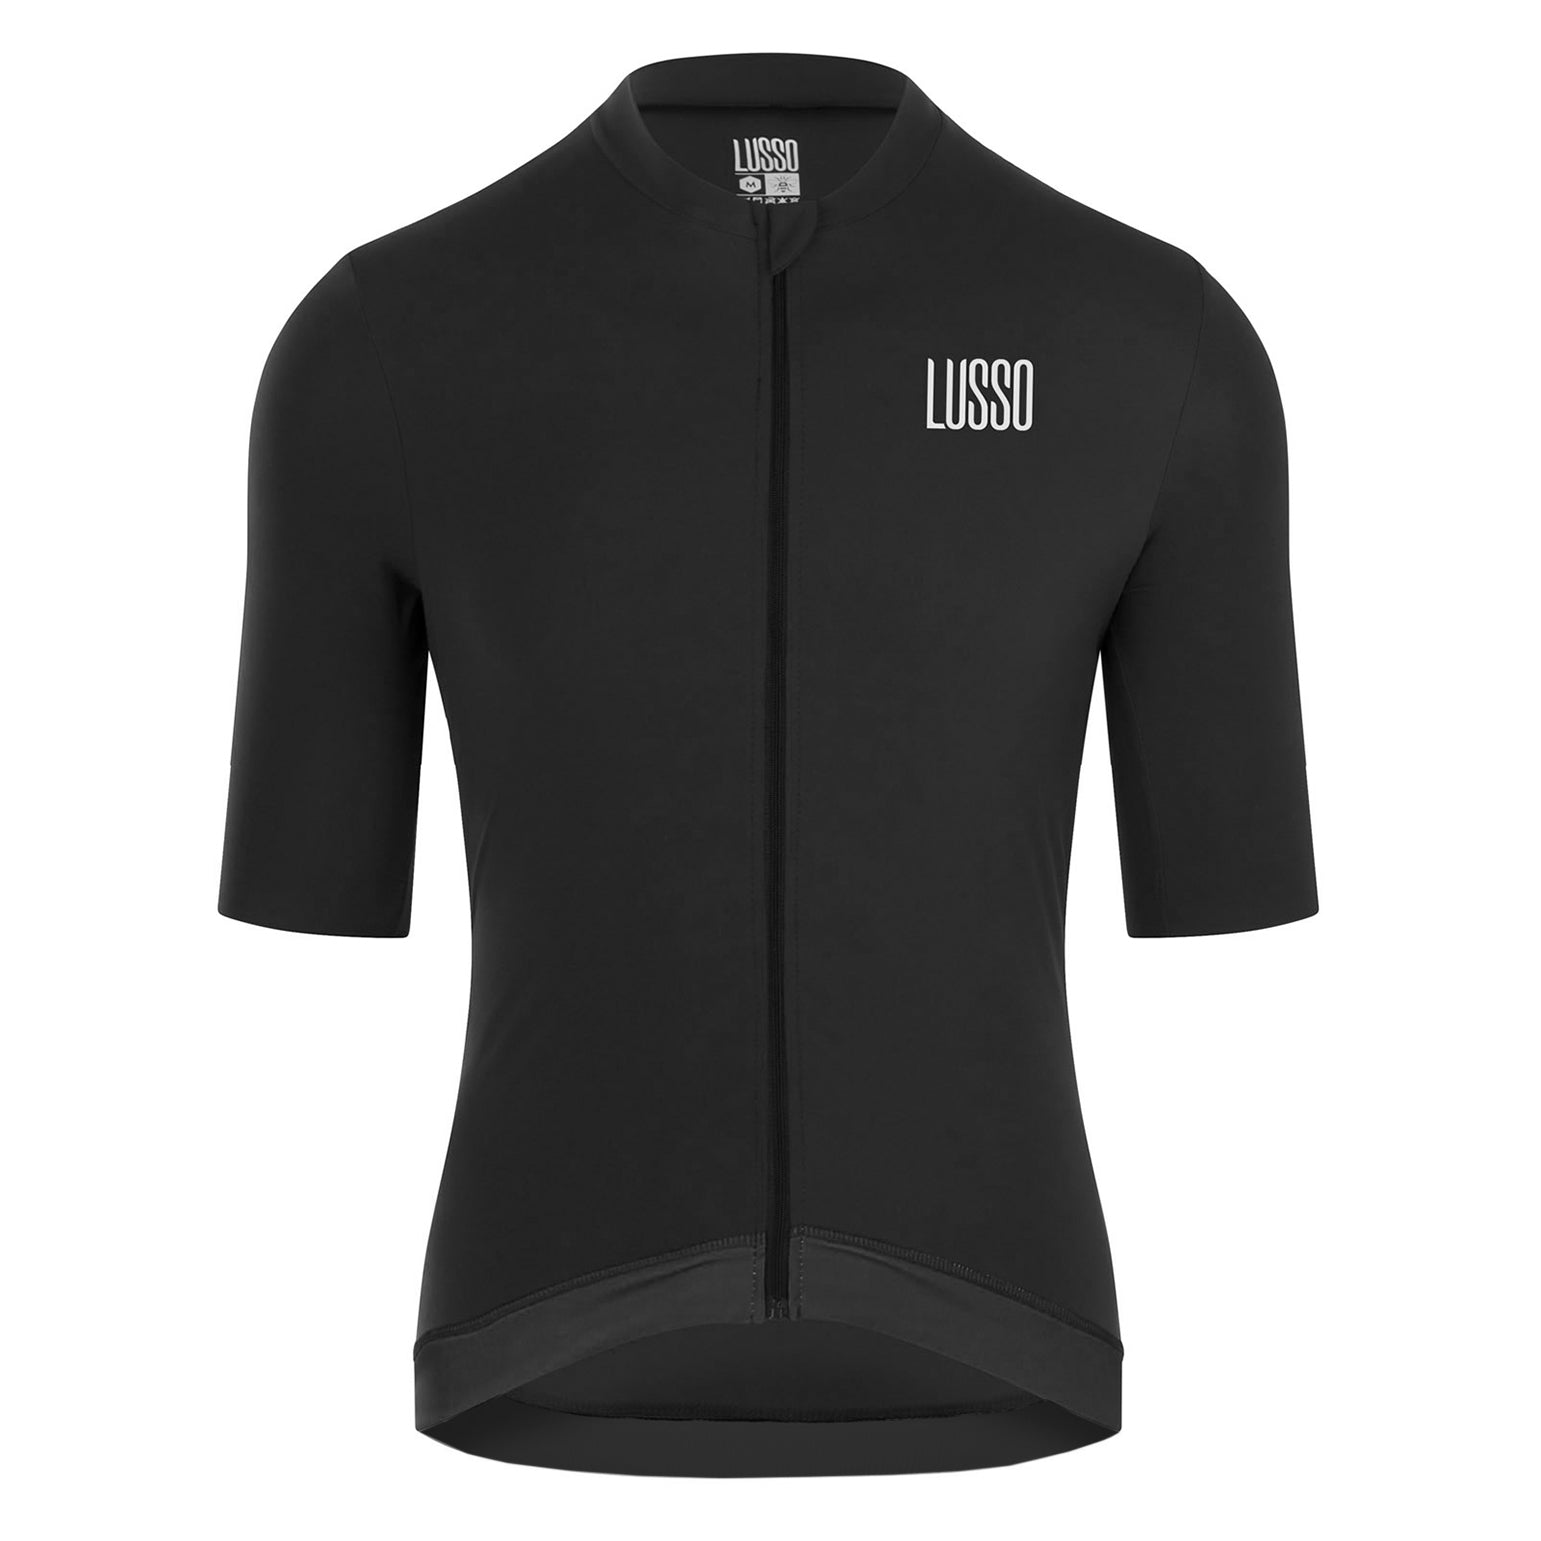 Paragon Jersey - Black - Lusso Cycle Wear